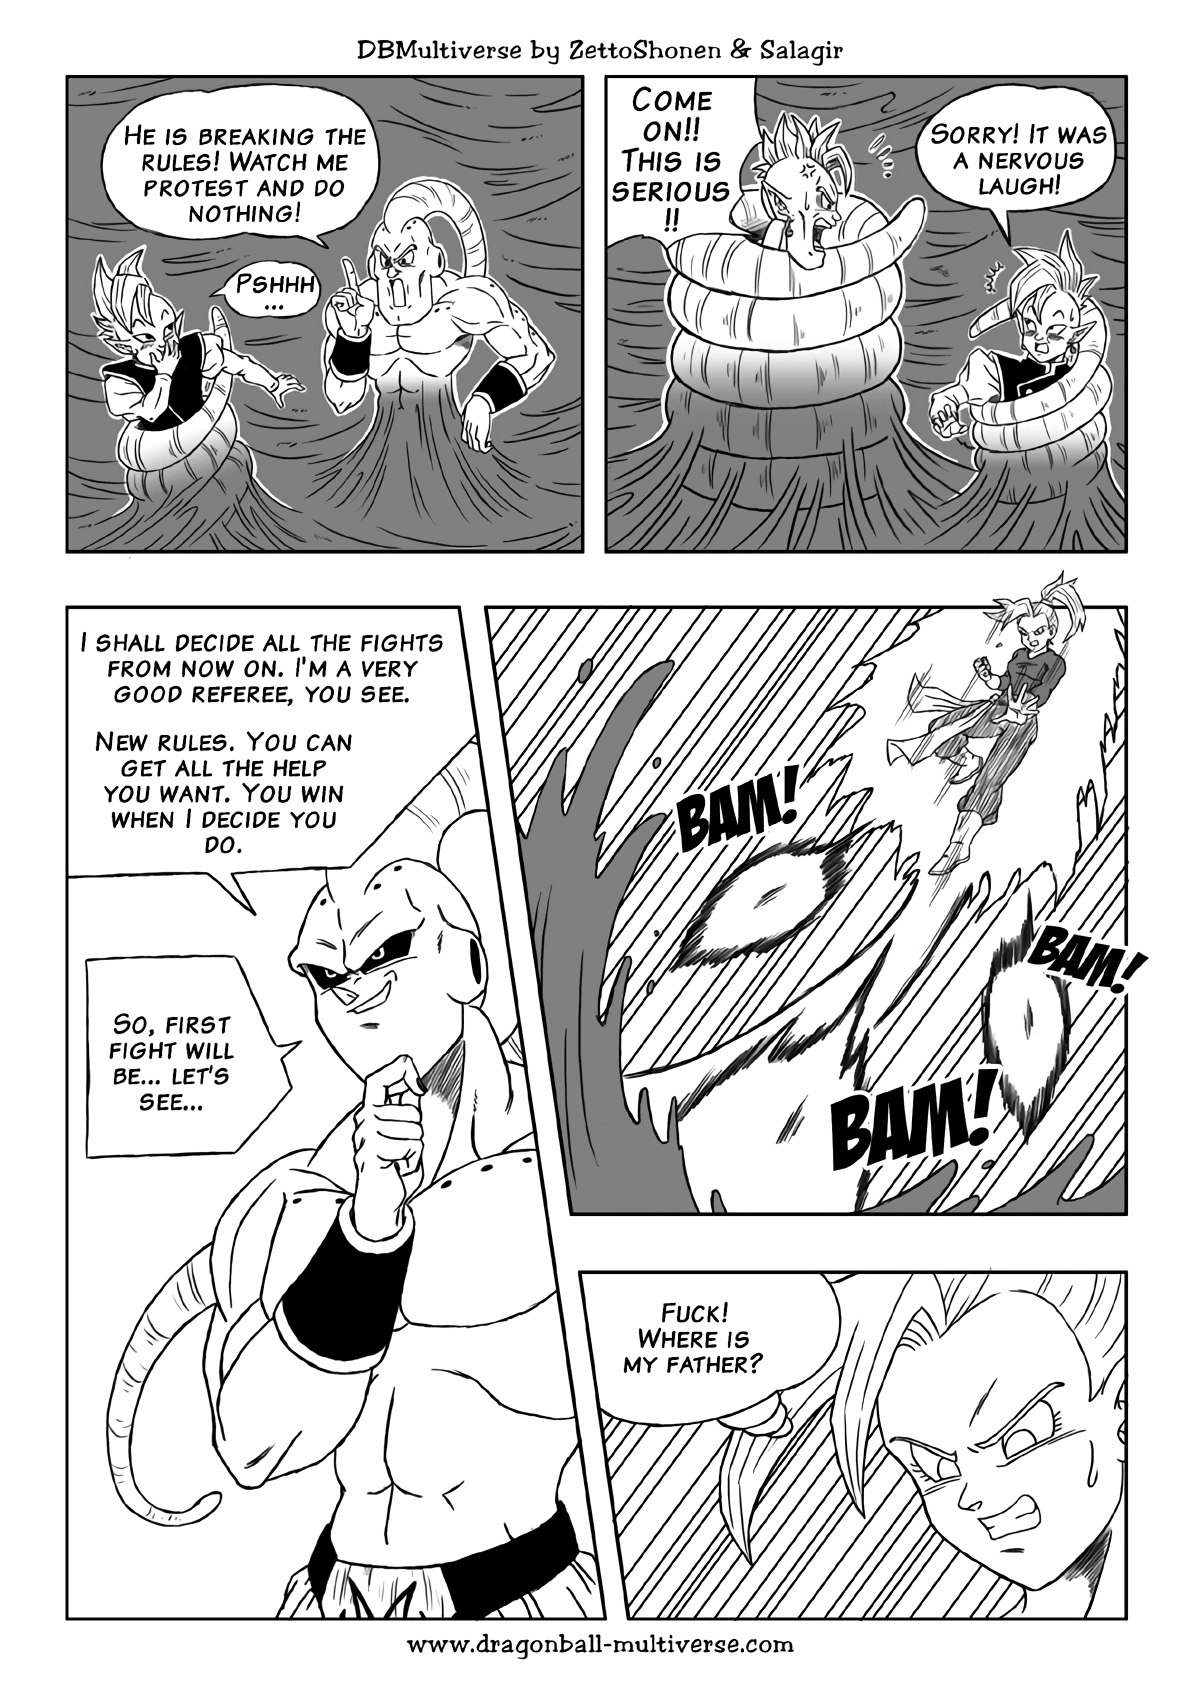 Universe 1 - How it all began - Chapter 83, Page 1917 - DBMultiverse